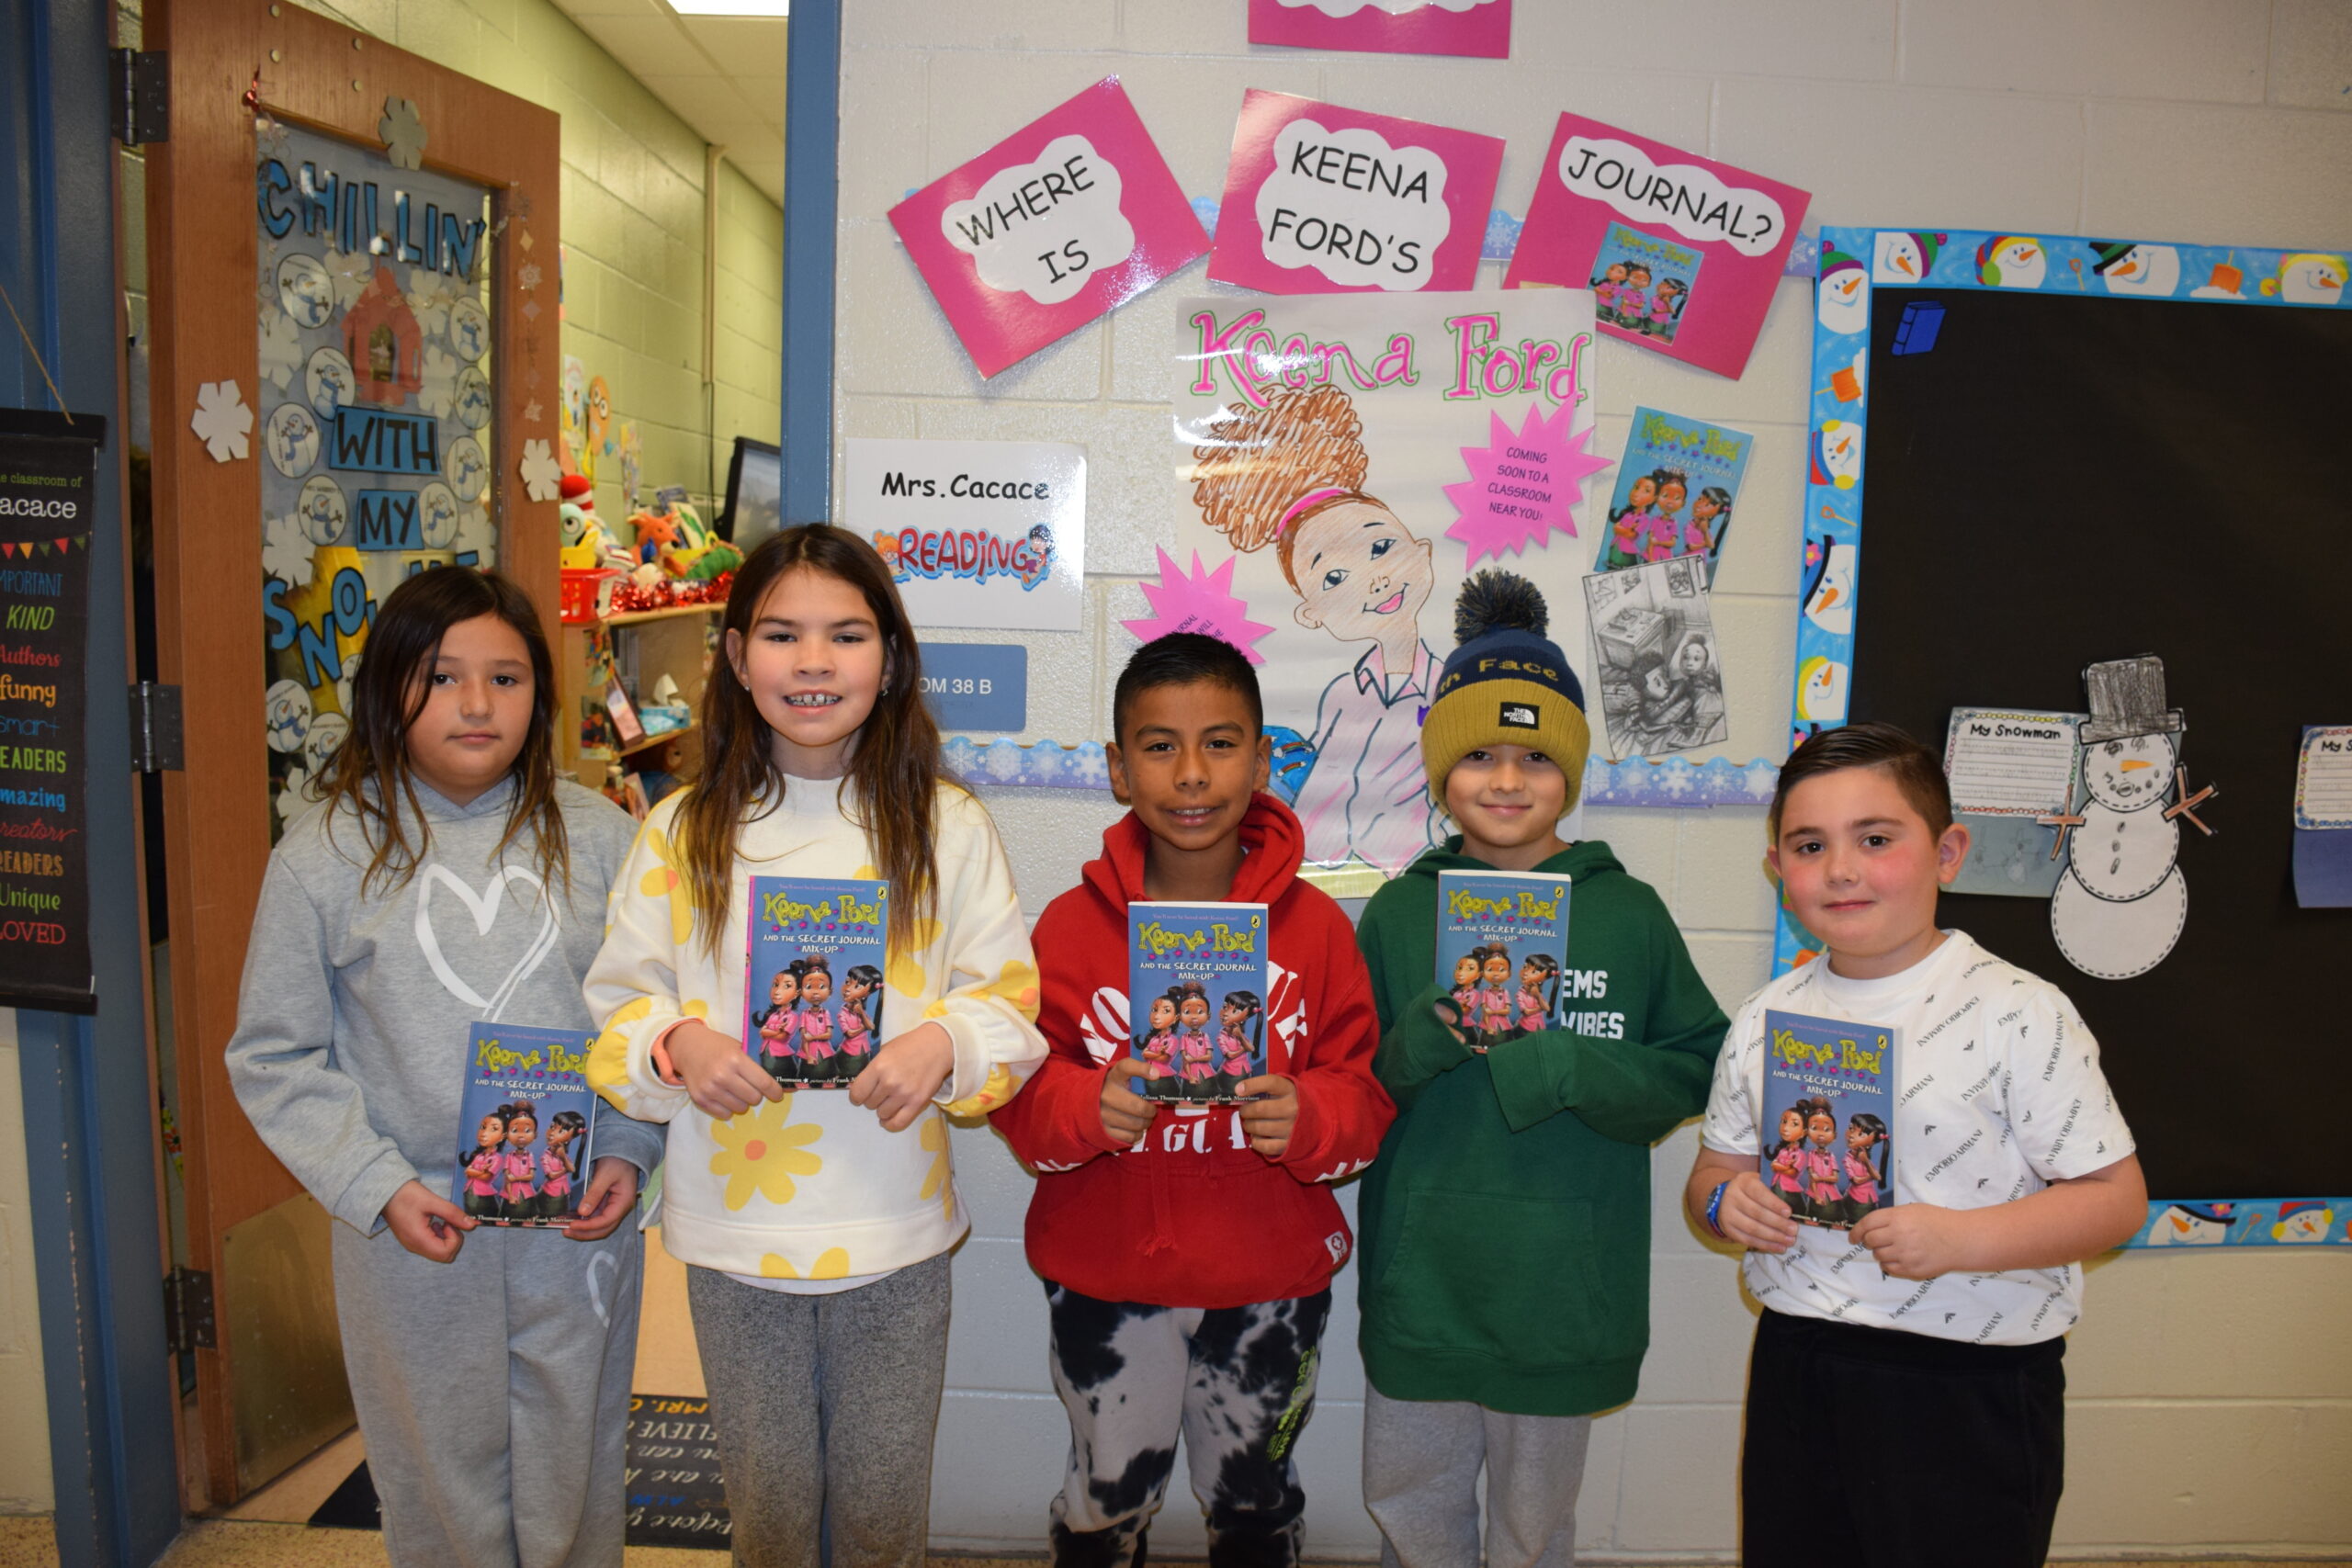 As part of an annual reading program, Hampton Bays Elementary School students are collaboratively reading “Keena Ford and the Secret Journal Mix-Up” by Melissa
Thomson. COURTESY HAMPTON BAYS SCHOOL DISTRICT